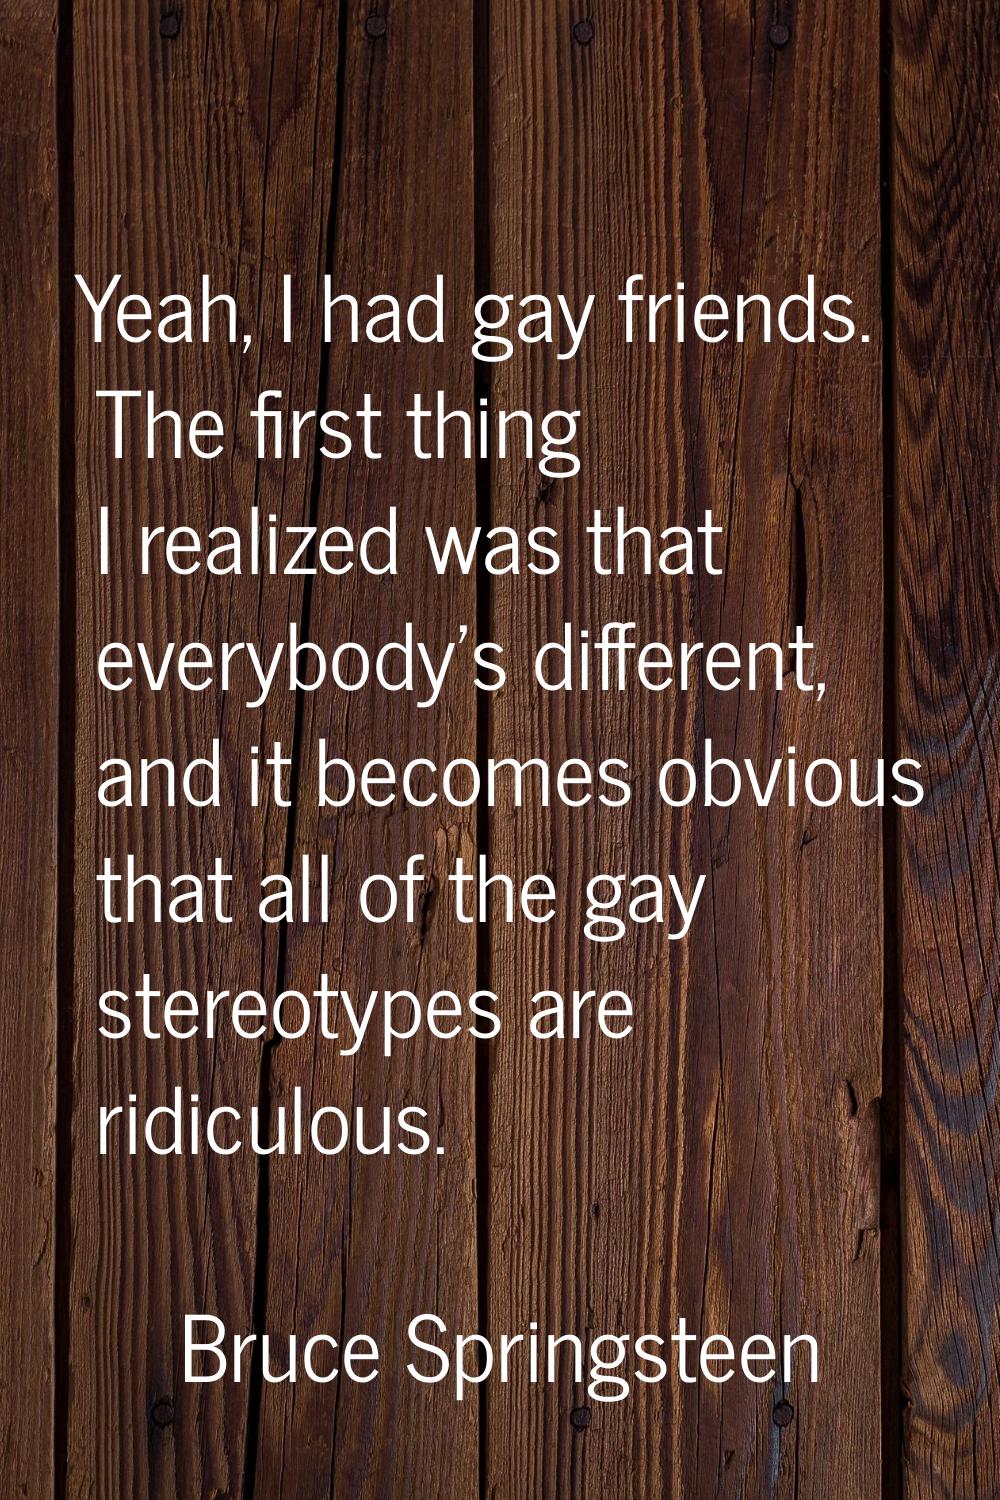 Yeah, I had gay friends. The first thing I realized was that everybody's different, and it becomes 